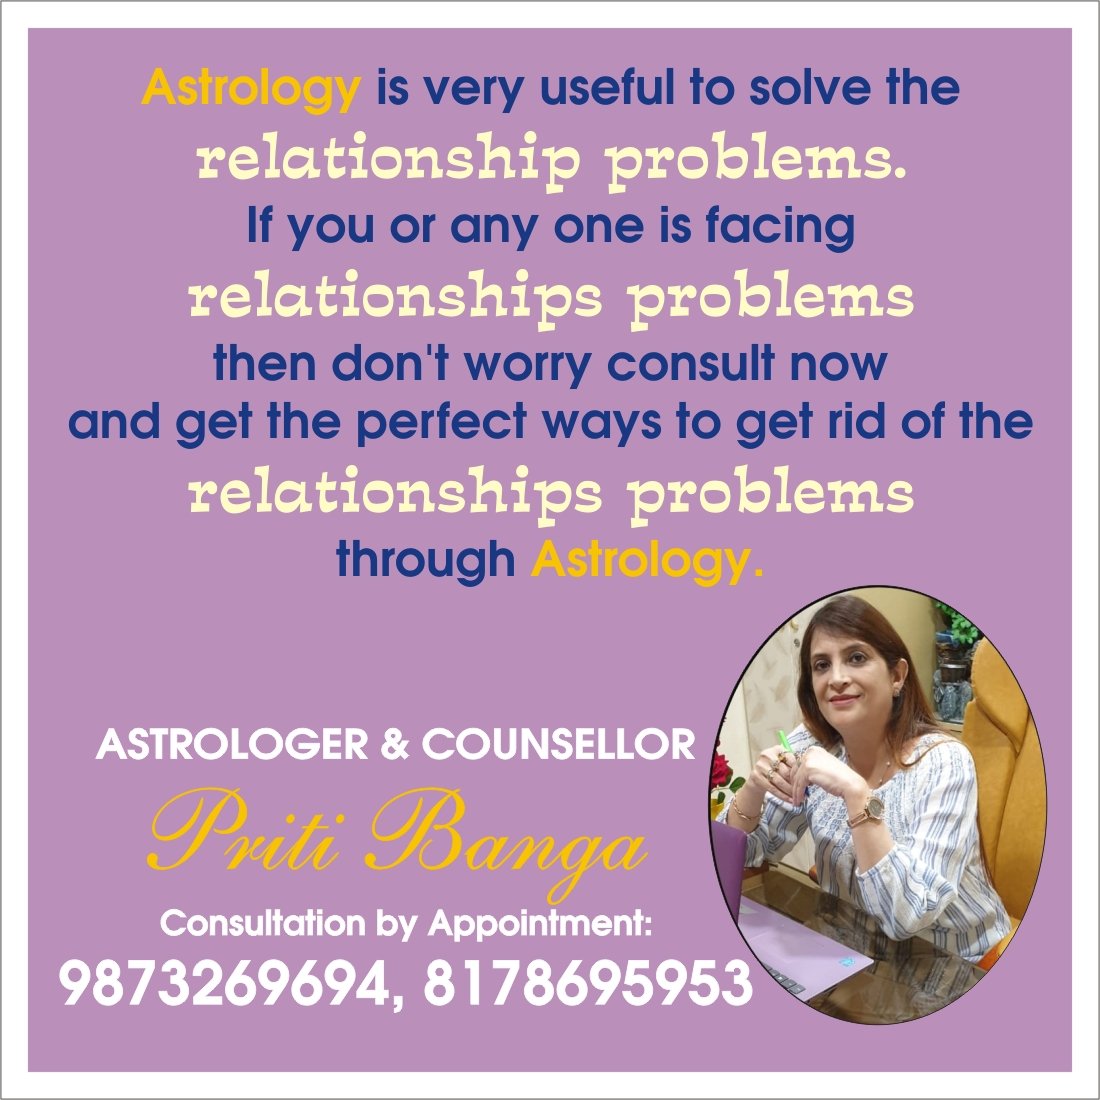 Book your appointment to get future predictions and remedies at
9873269694
 #astrologyreading #lifepartner❤️ #astrologer #astroremedies💫🌞 #divorce #breakup #financeissues #marriageproblem #solutions #relationship #bestastrologerindelhi #bestastrology #astrologerind